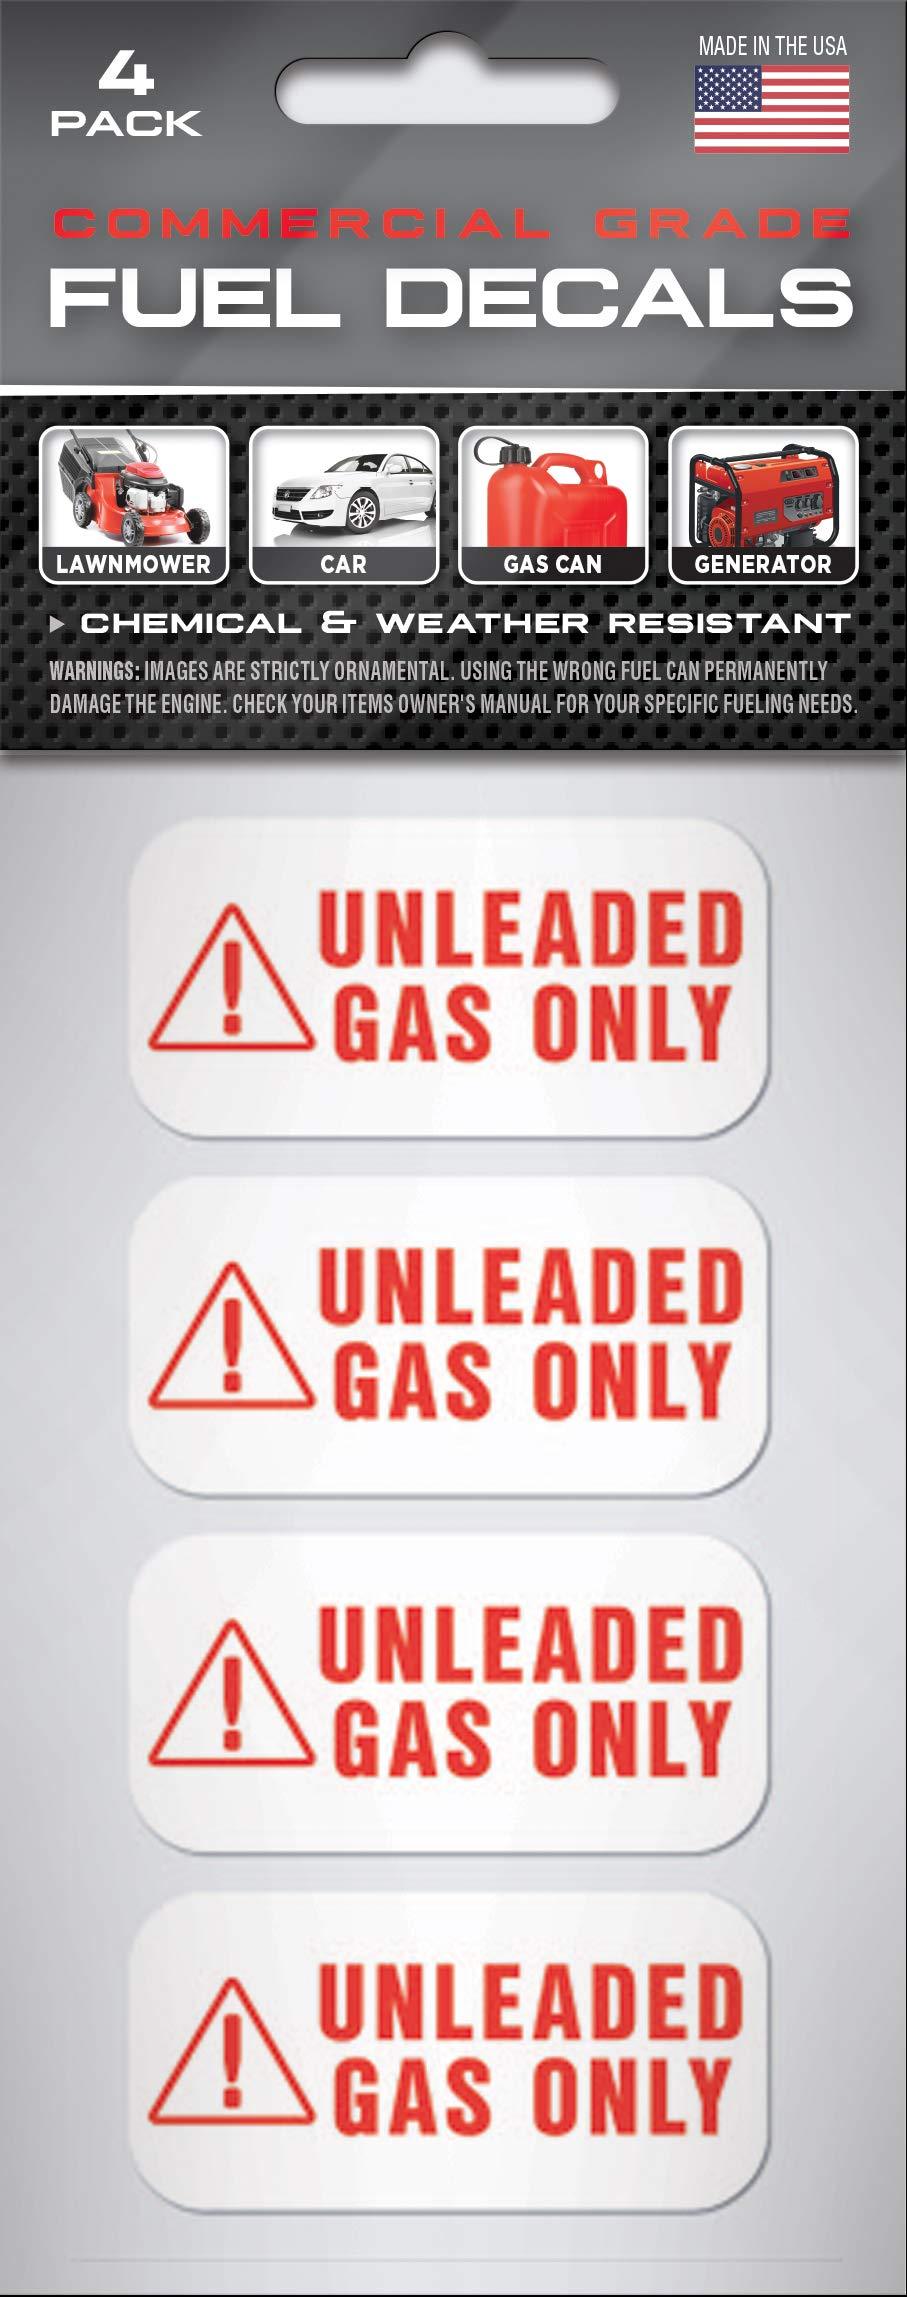  [AUSTRALIA] - UNLEADED Fuel Stickers Decals Labels | 4 Pack - 2" x 1", Rental Car, Automobile, Sedan, Coupe | Extreme Stick | Weather Resistant | Ultra Durable | Unleaded Gas Only Sticker